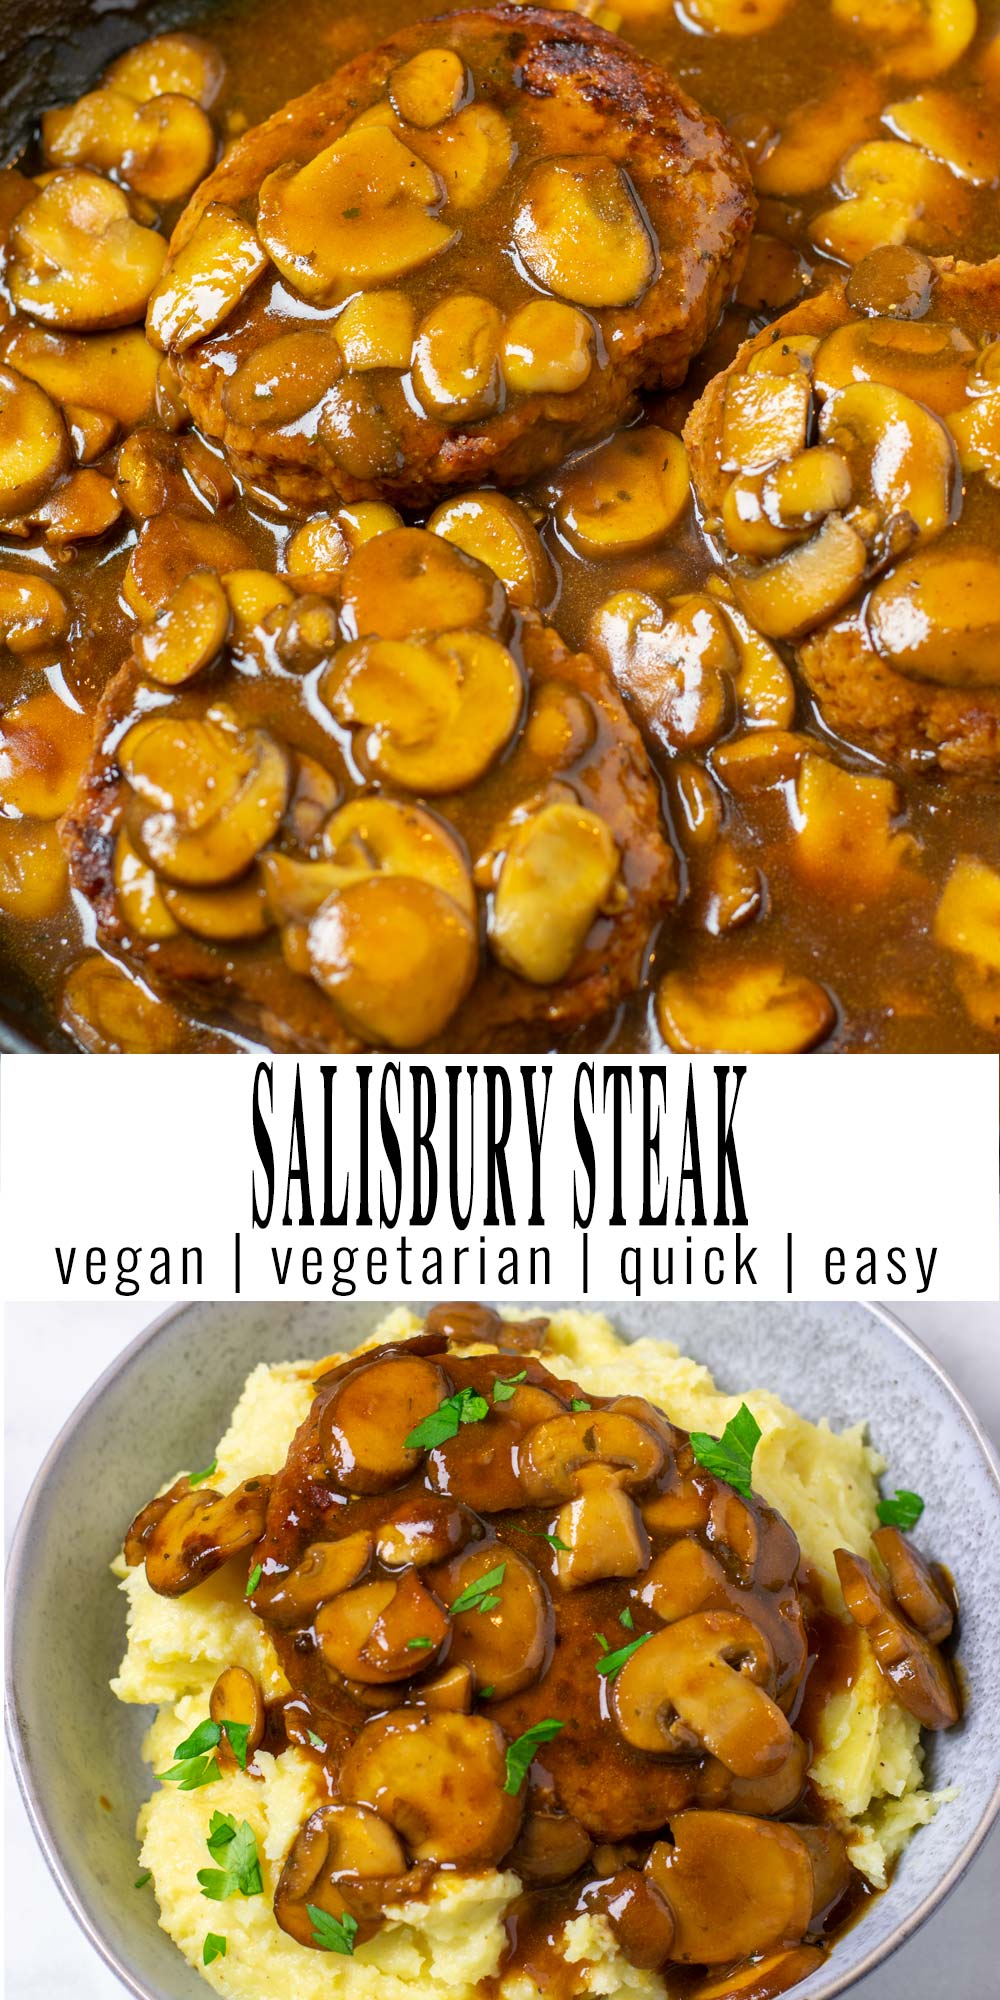 Collage of two pictures of the Salisbury Steak with recipe title text.